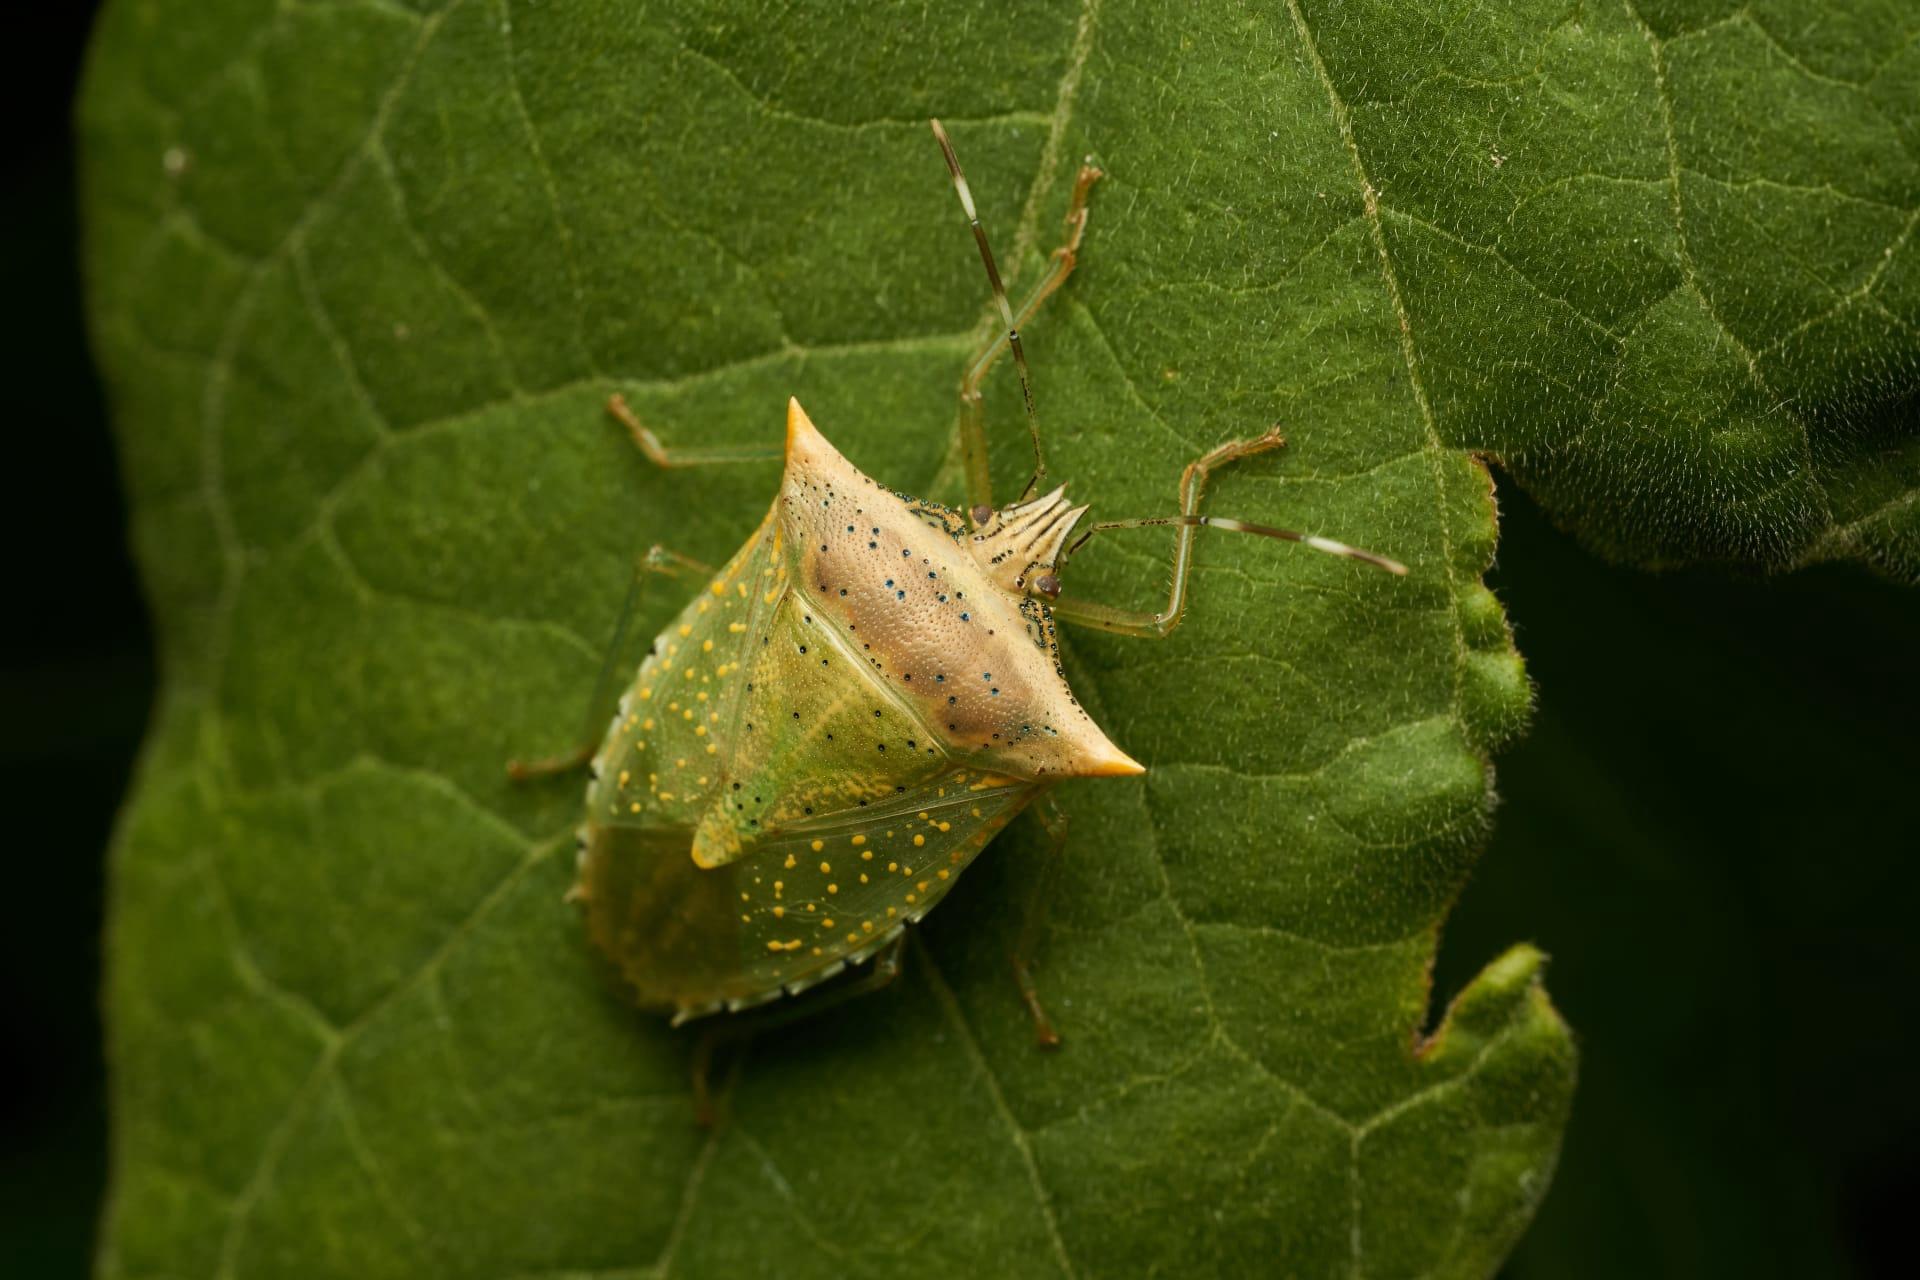 Shield bug pictures